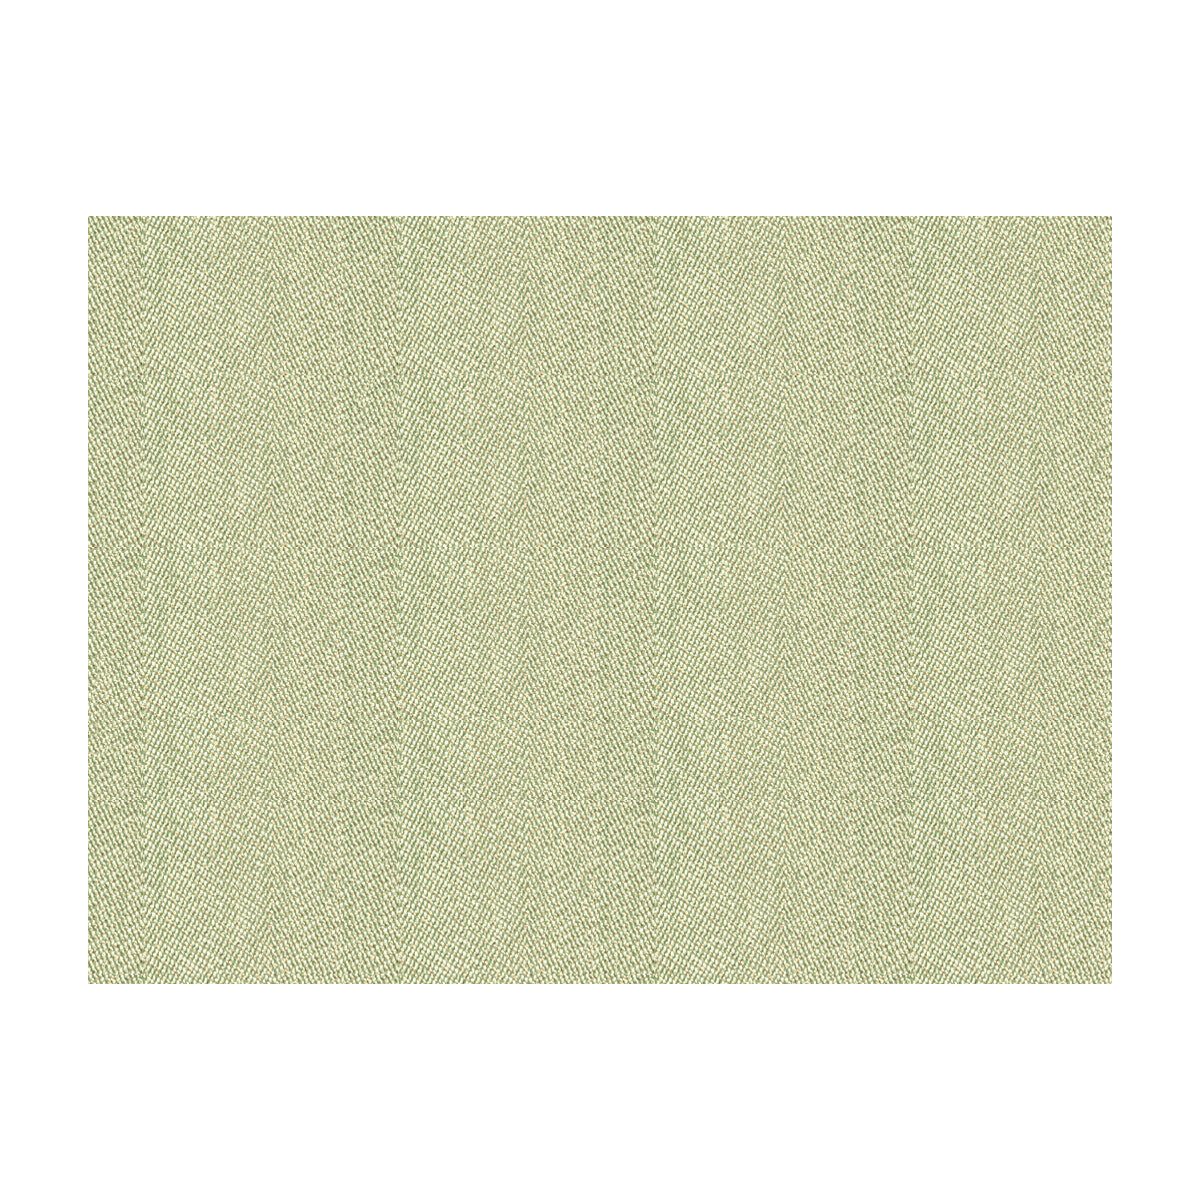 Kravet Smart fabric in 33832-23 color - pattern 33832.23.0 - by Kravet Smart in the Performance Crypton Home collection